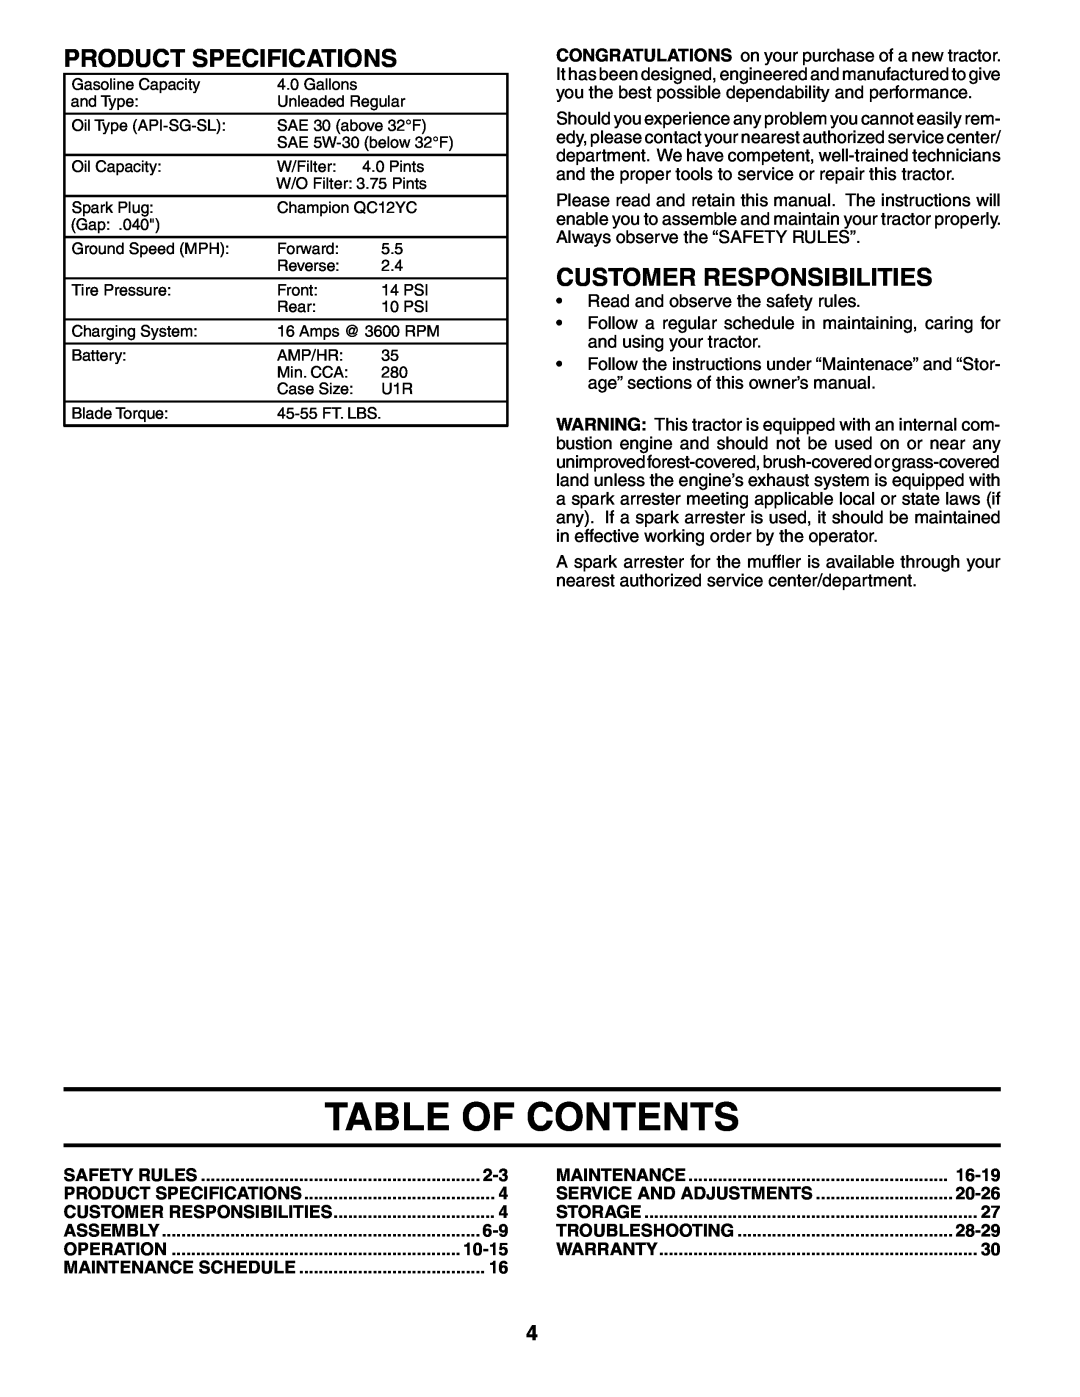 Poulan DB24H48YT manual Table Of Contents, Product Specifications, Customer Responsibilities 